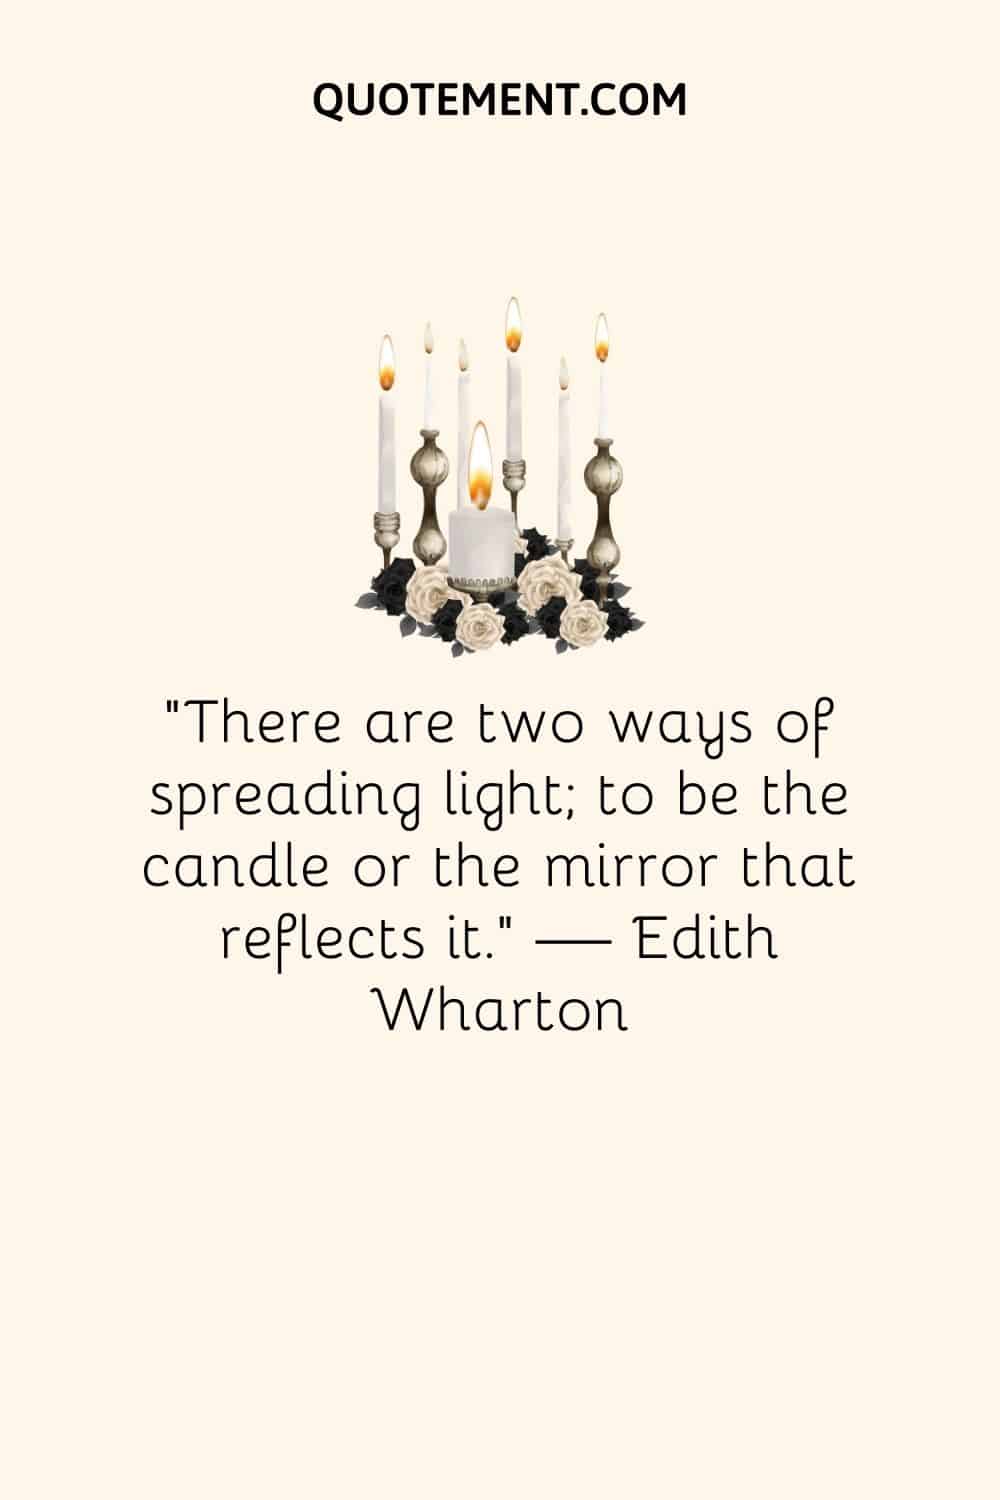 “There are two ways of spreading light; to be the candle or the mirror that reflects it.” — Edith Wharton